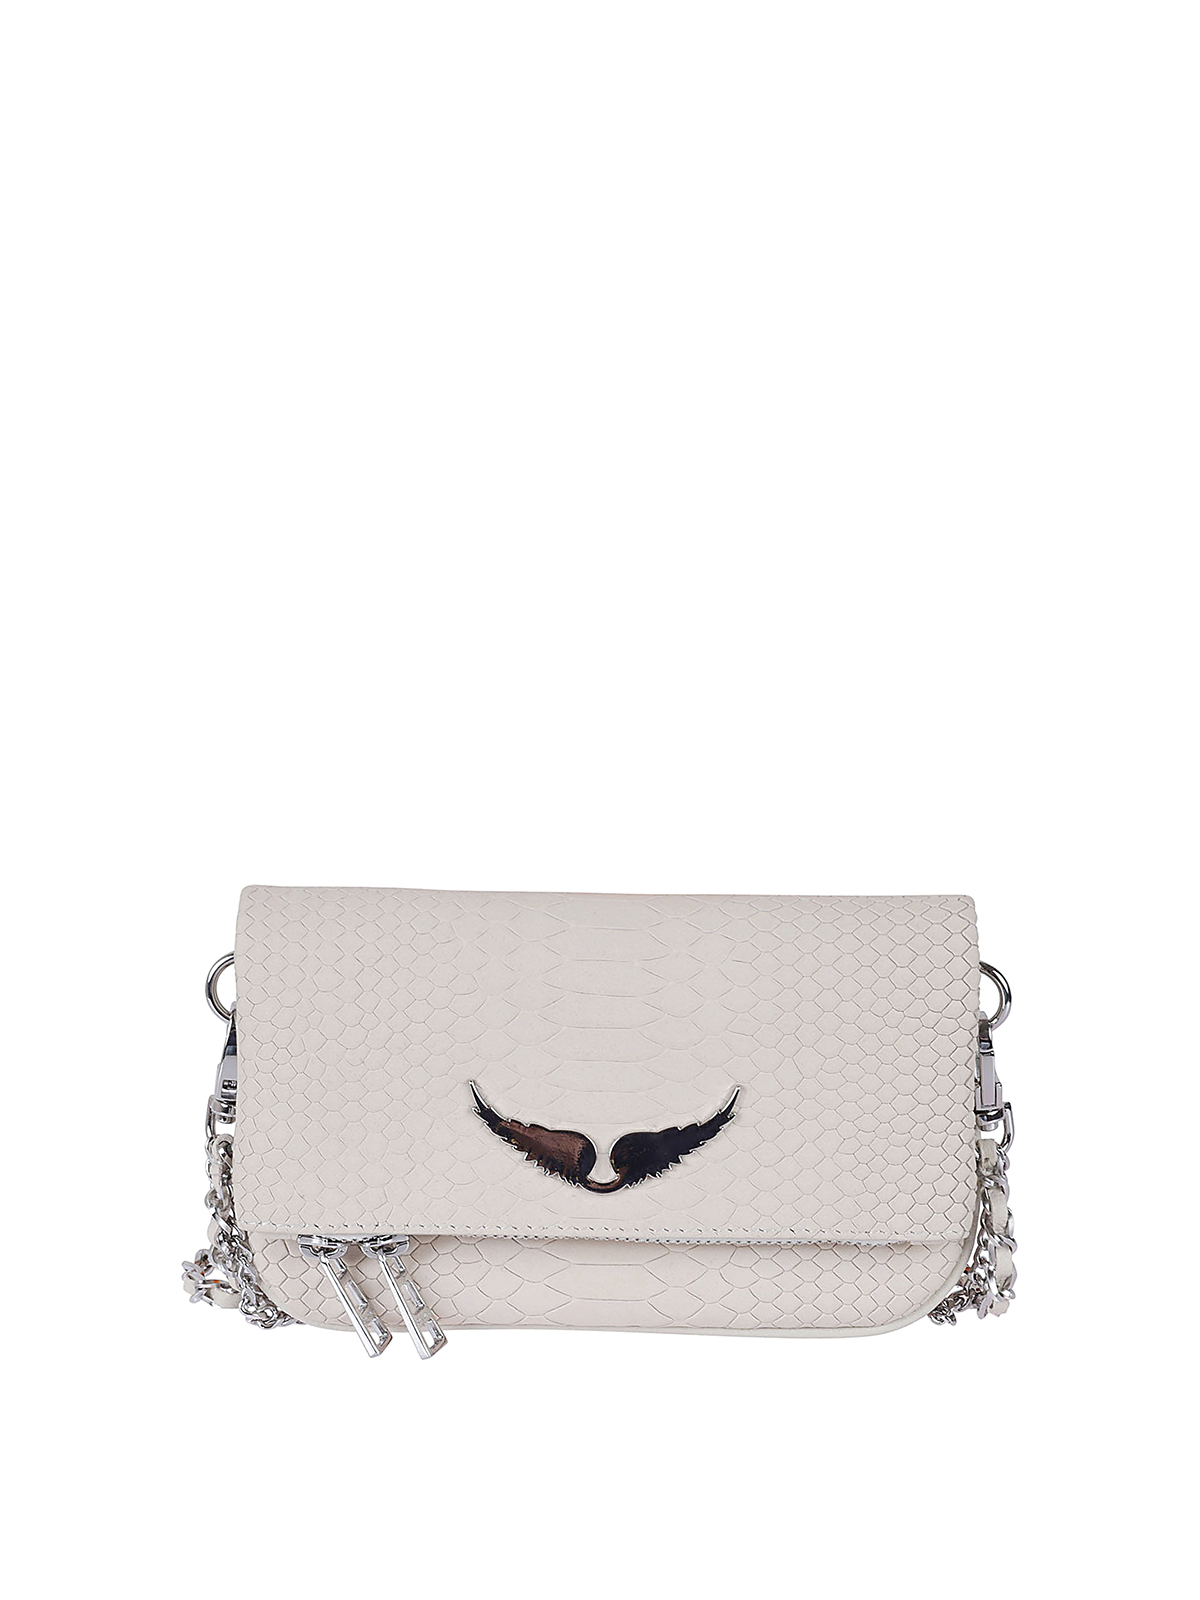 Zadig & Voltaire Reptile Print Leather Clutch Bag In White